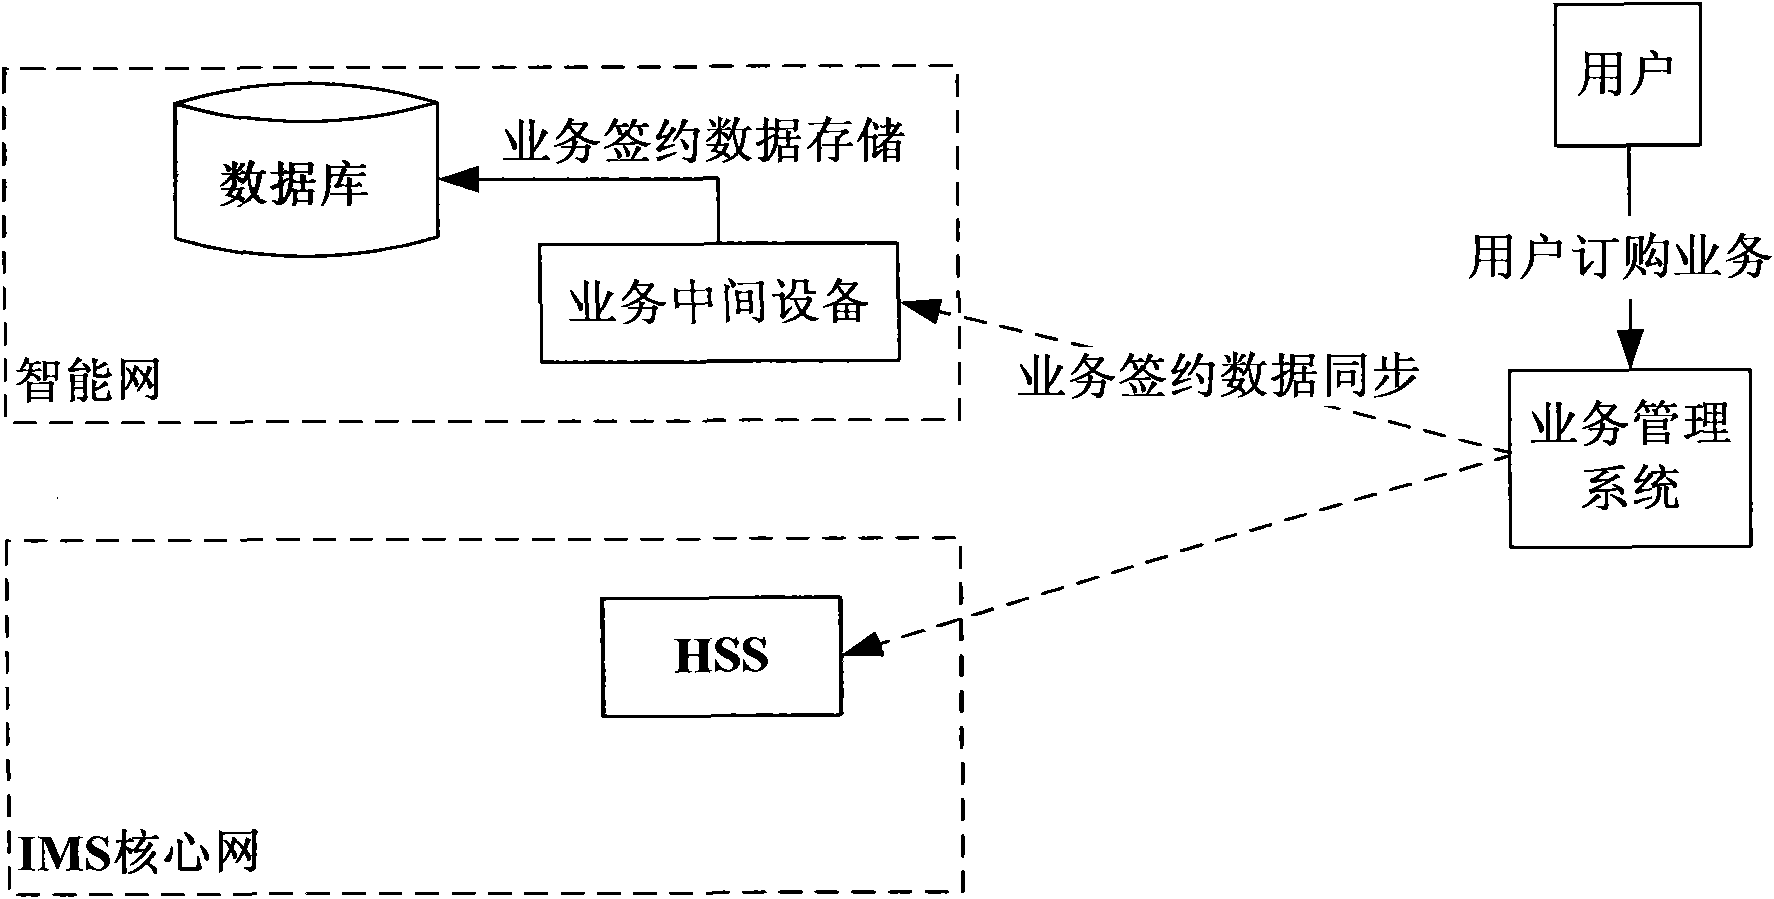 Service trigger method, service intermediate equipment and service trigger system